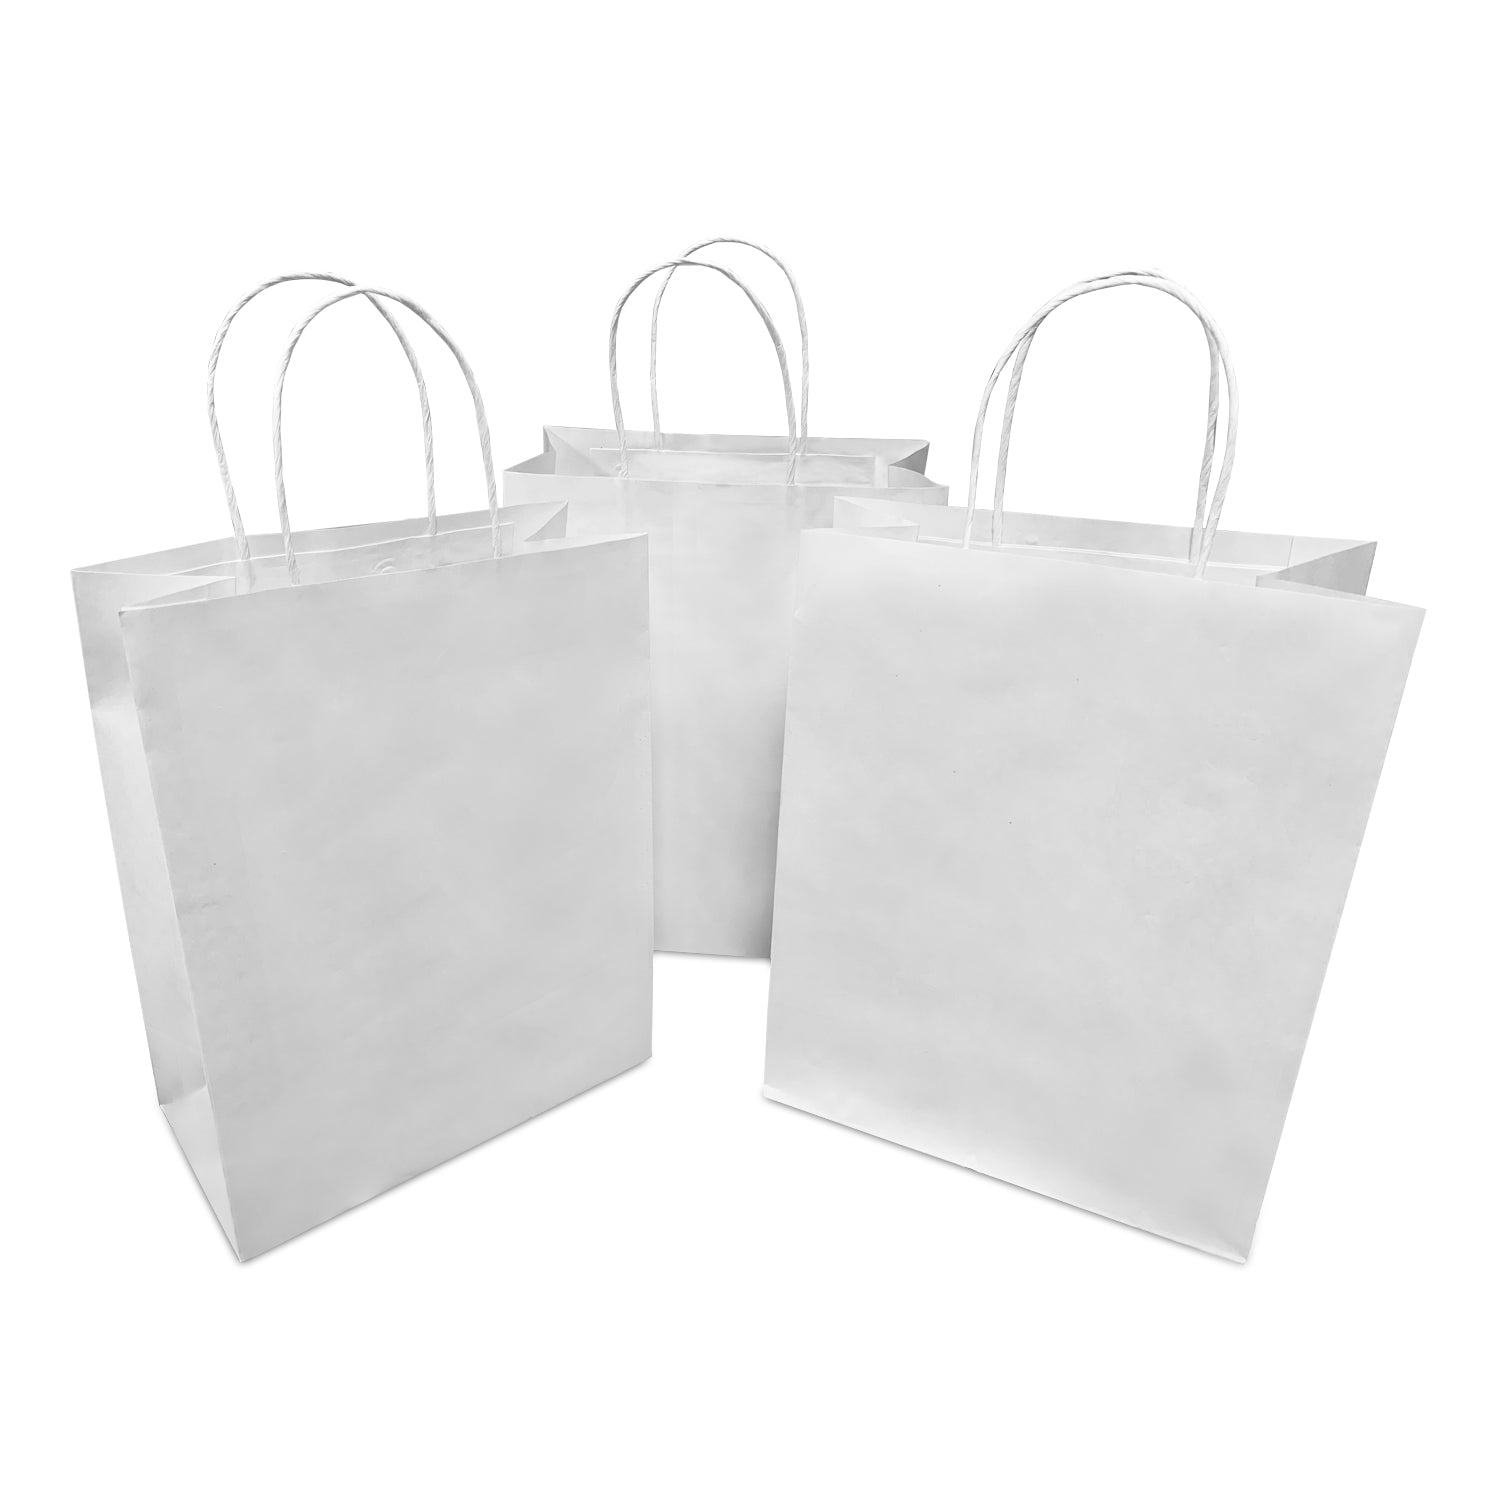 250 Pcs, Debbie, 10x5x13 inches, Kraft Paper Bags, with Twisted Handle